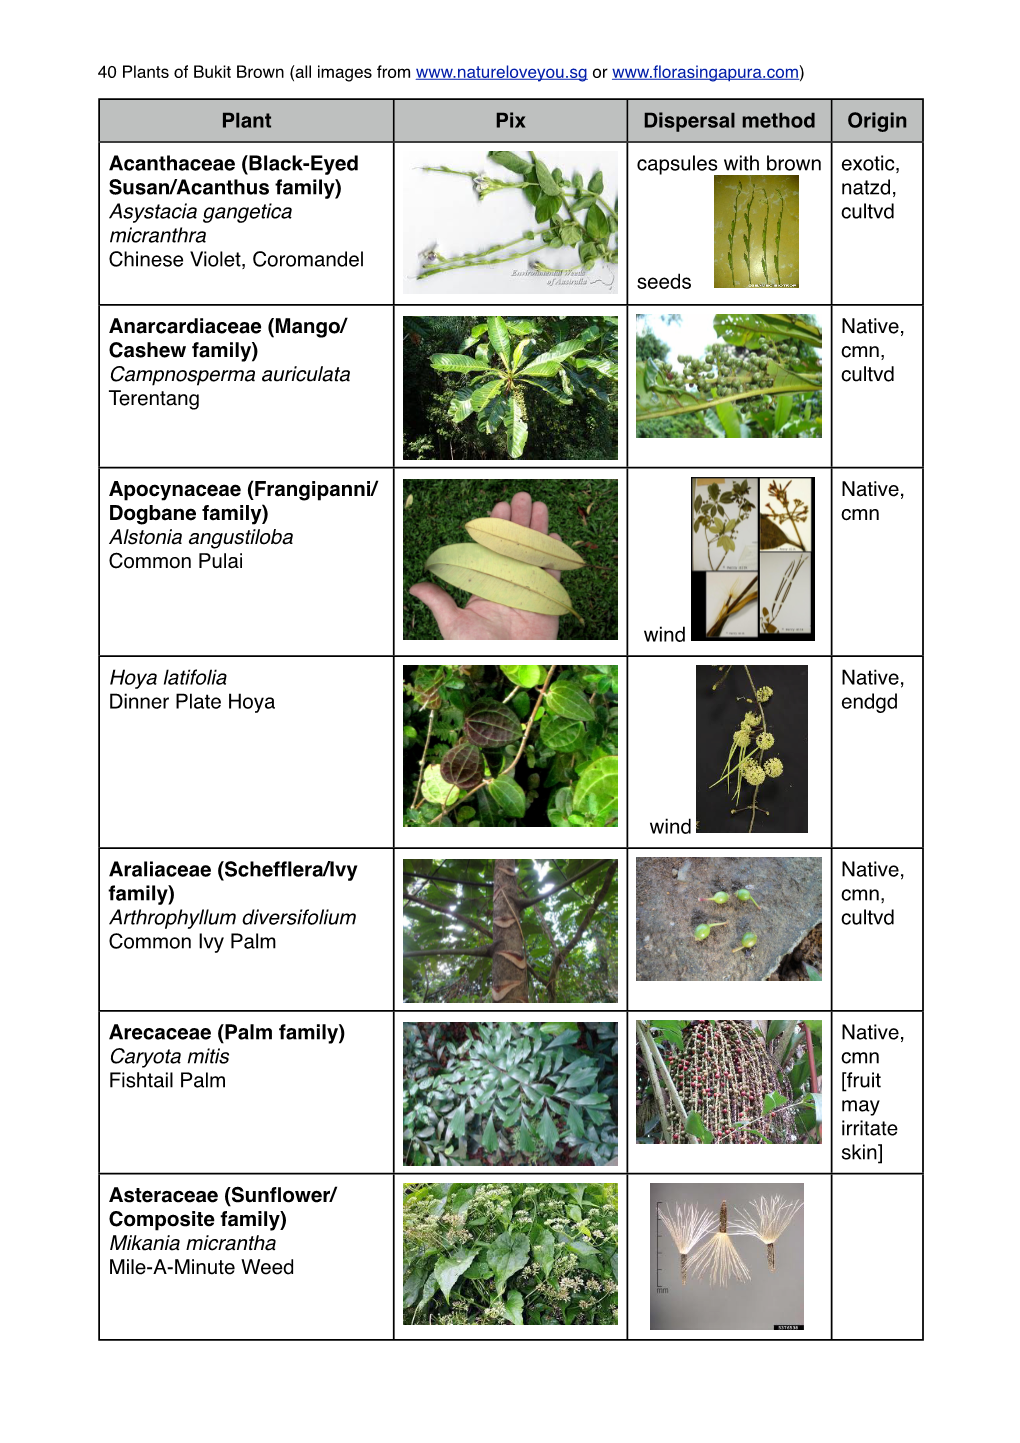 40 Plants of Bukit Brown (All Images from Or